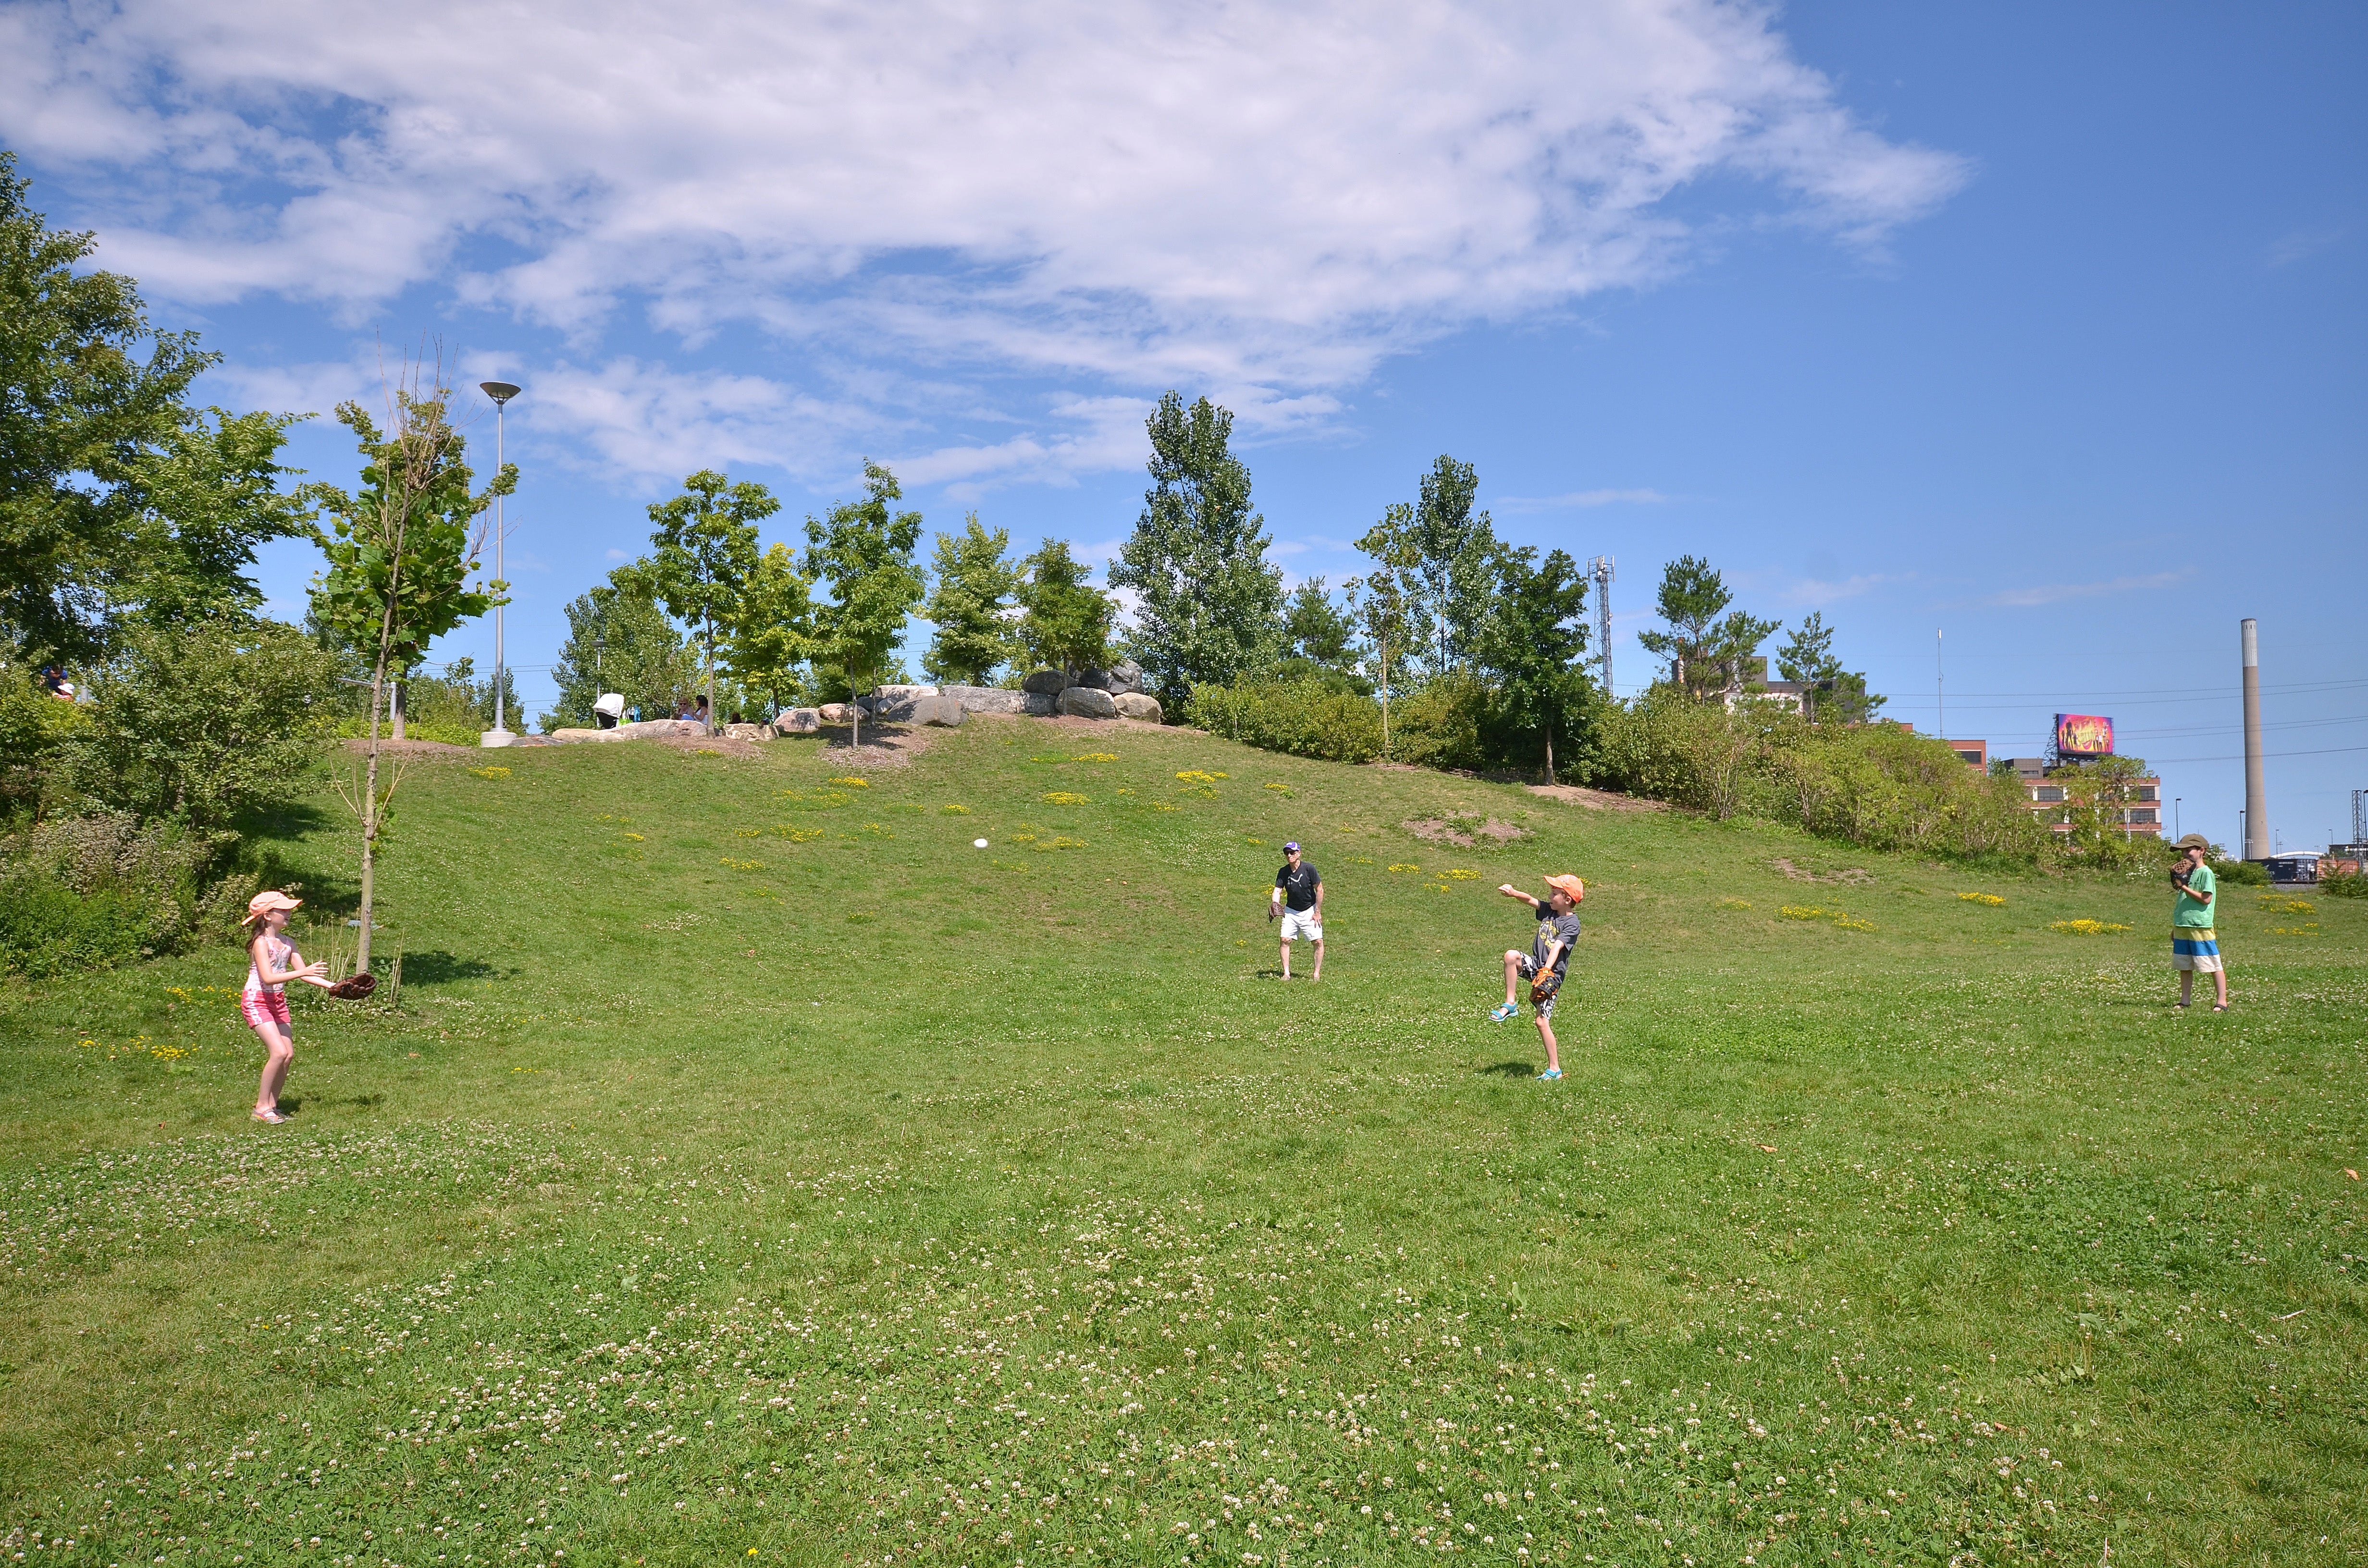 A young family plays catch on the gently sloping hills at Corktown Common.